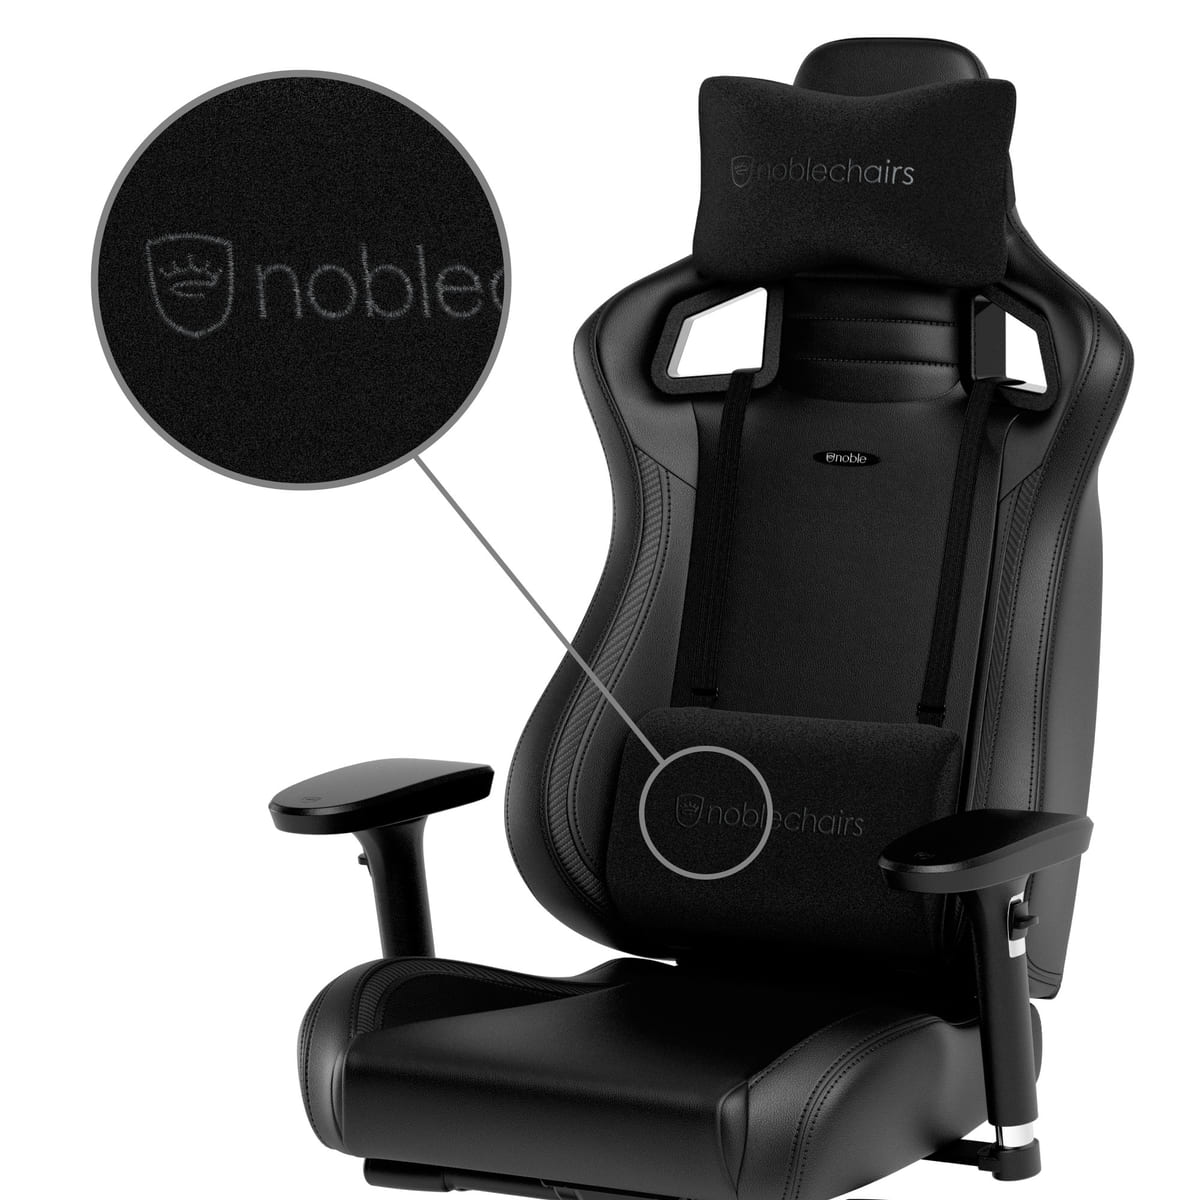 noblechairs(ノーブルチェアーズ)「EPIC COMPACT」１１